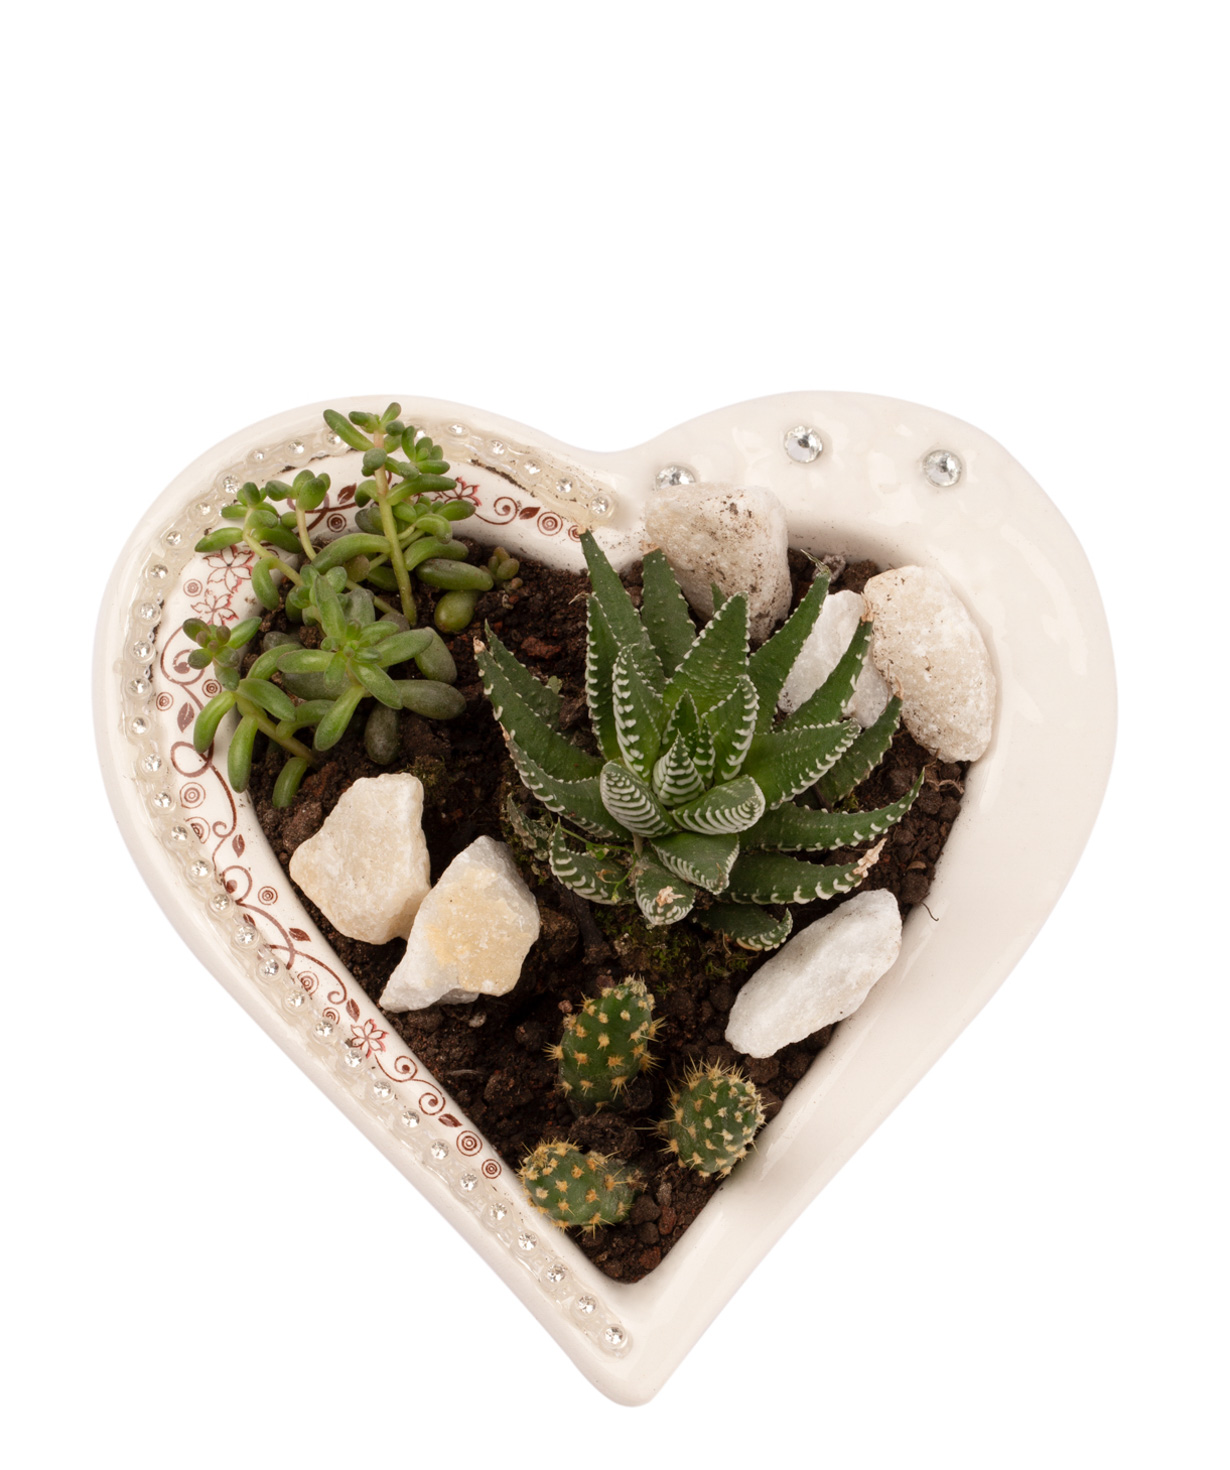 Plant `Eco Garden` Succulent, in a heart-shaped container